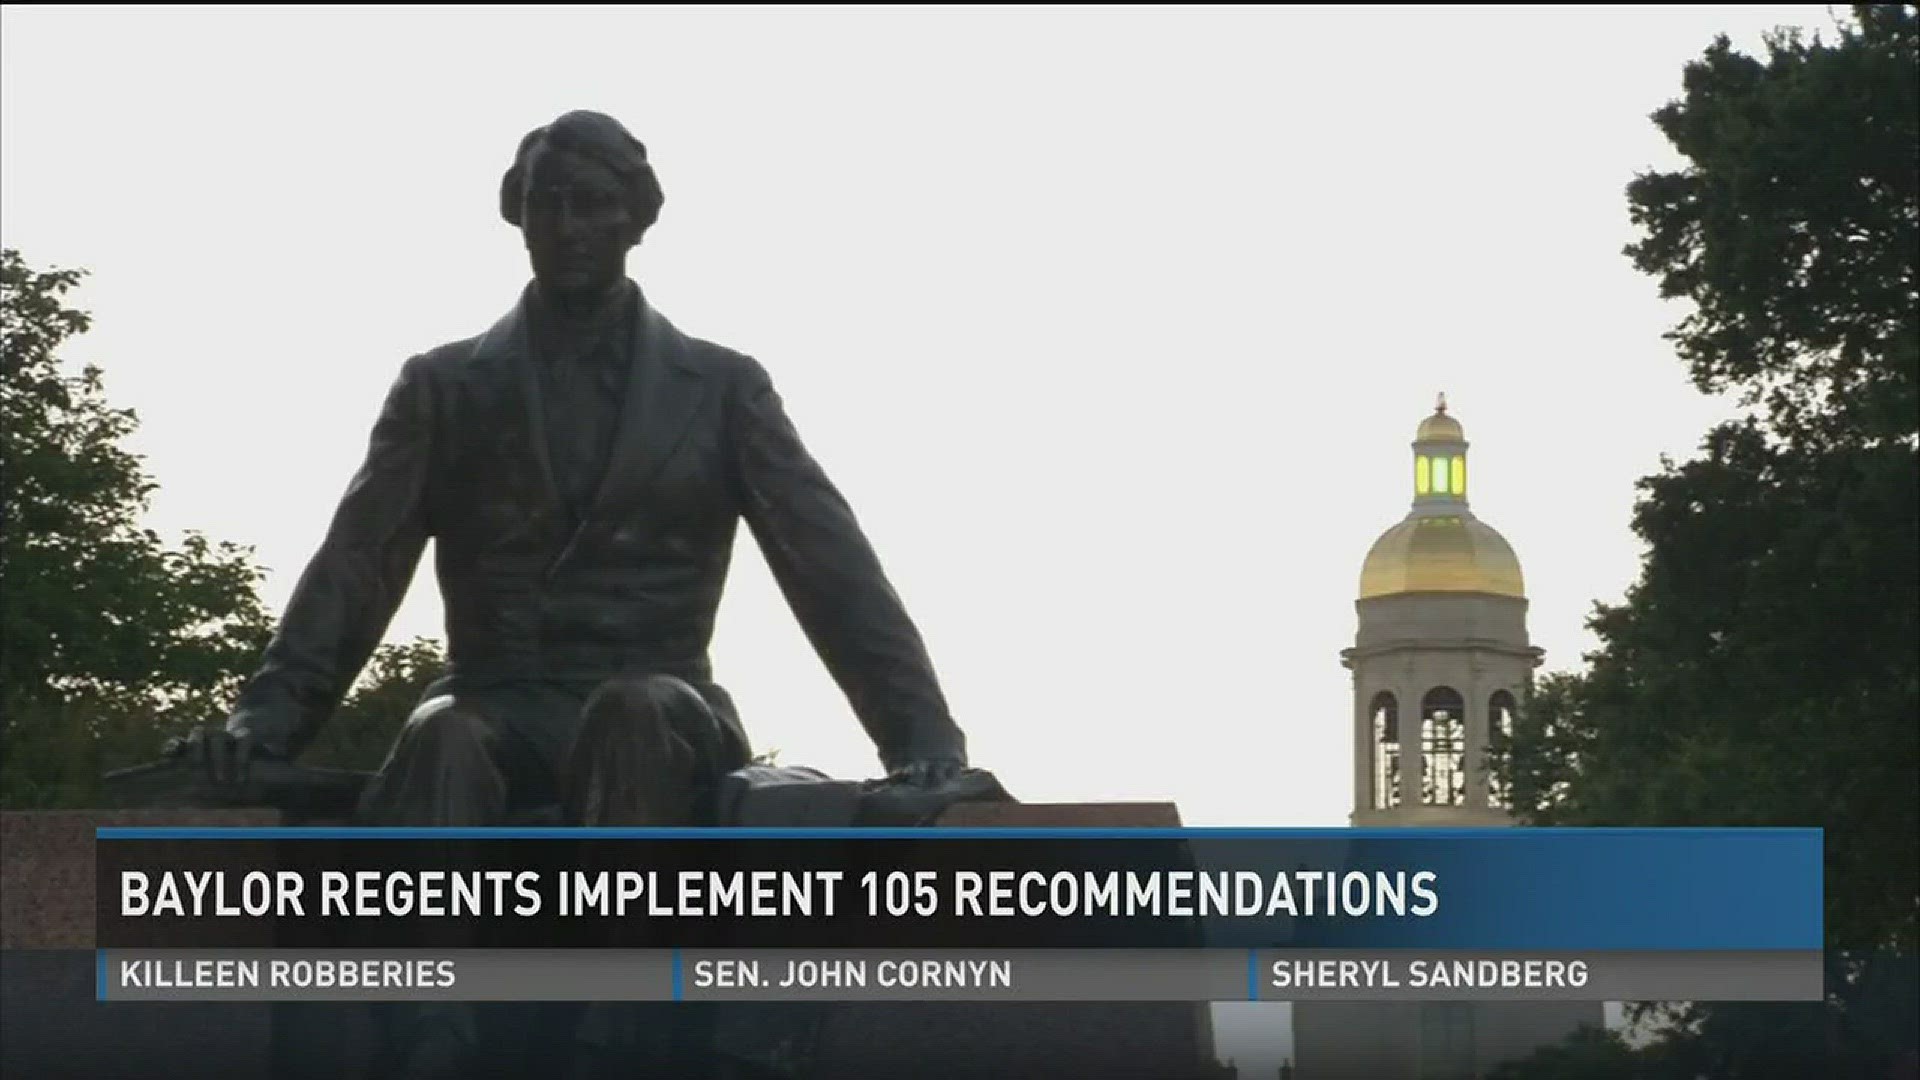 The Baylor Board of Regents says it has implemented all 105 recommendations to fix the on-campus culture following the school's sexual assault scandal.